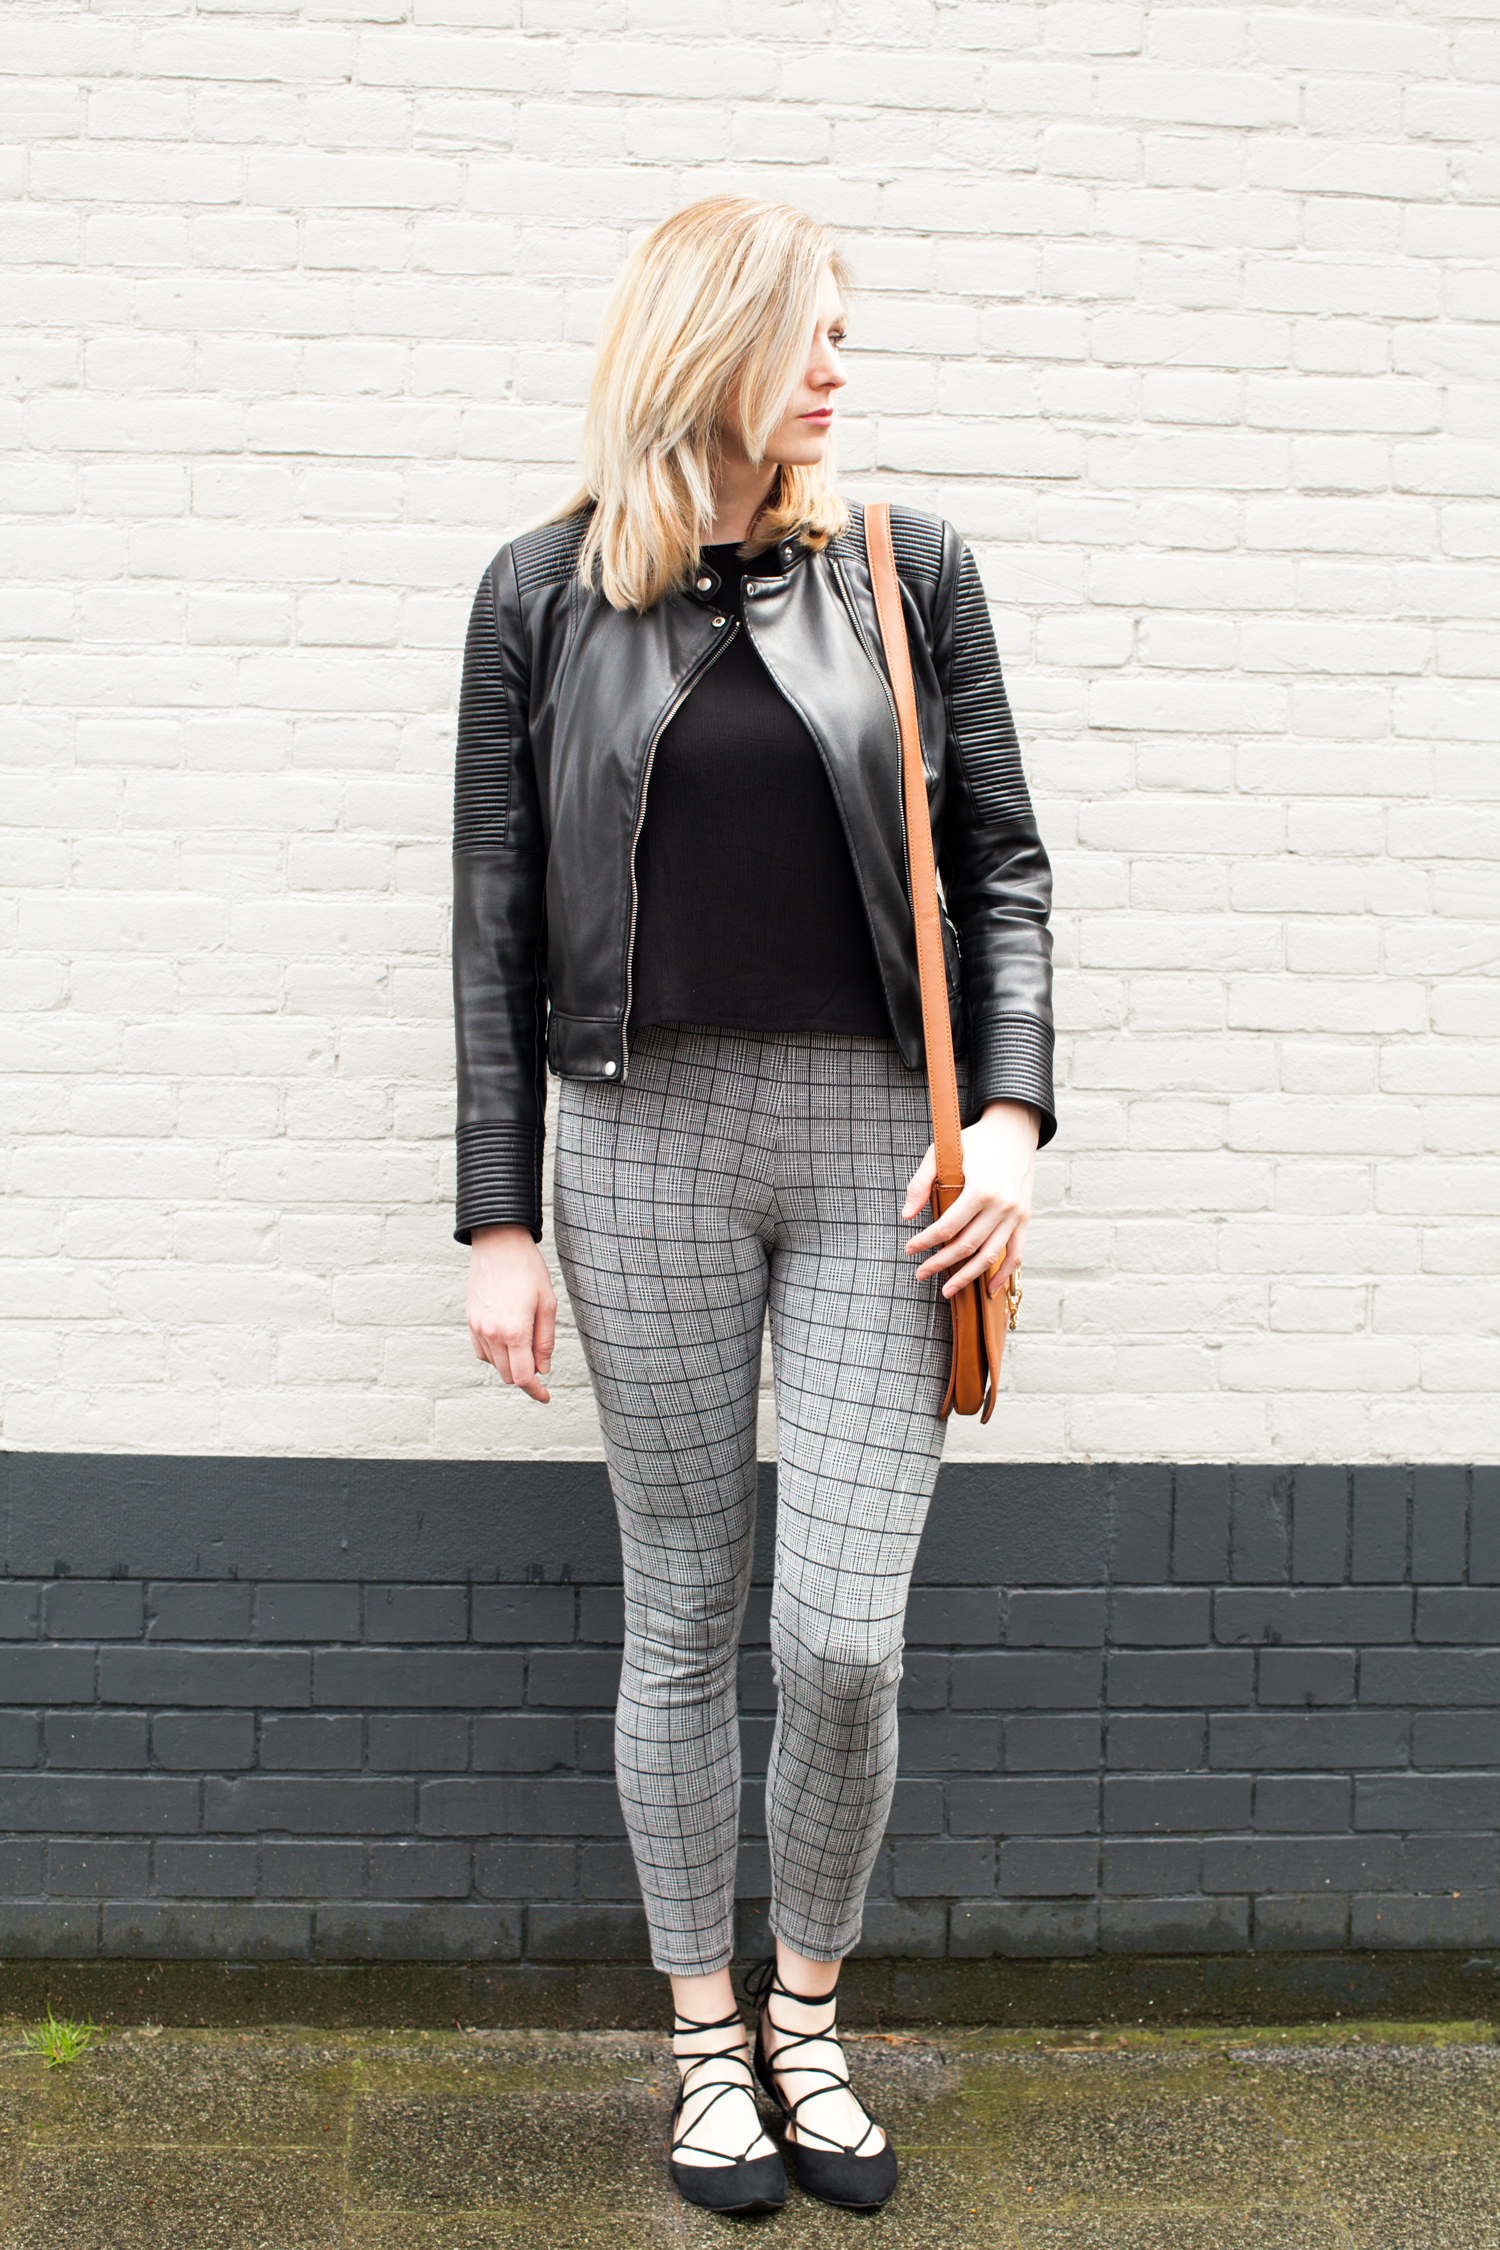 Black and white outfit. Open shoulder top + gingham pants + lace up flats